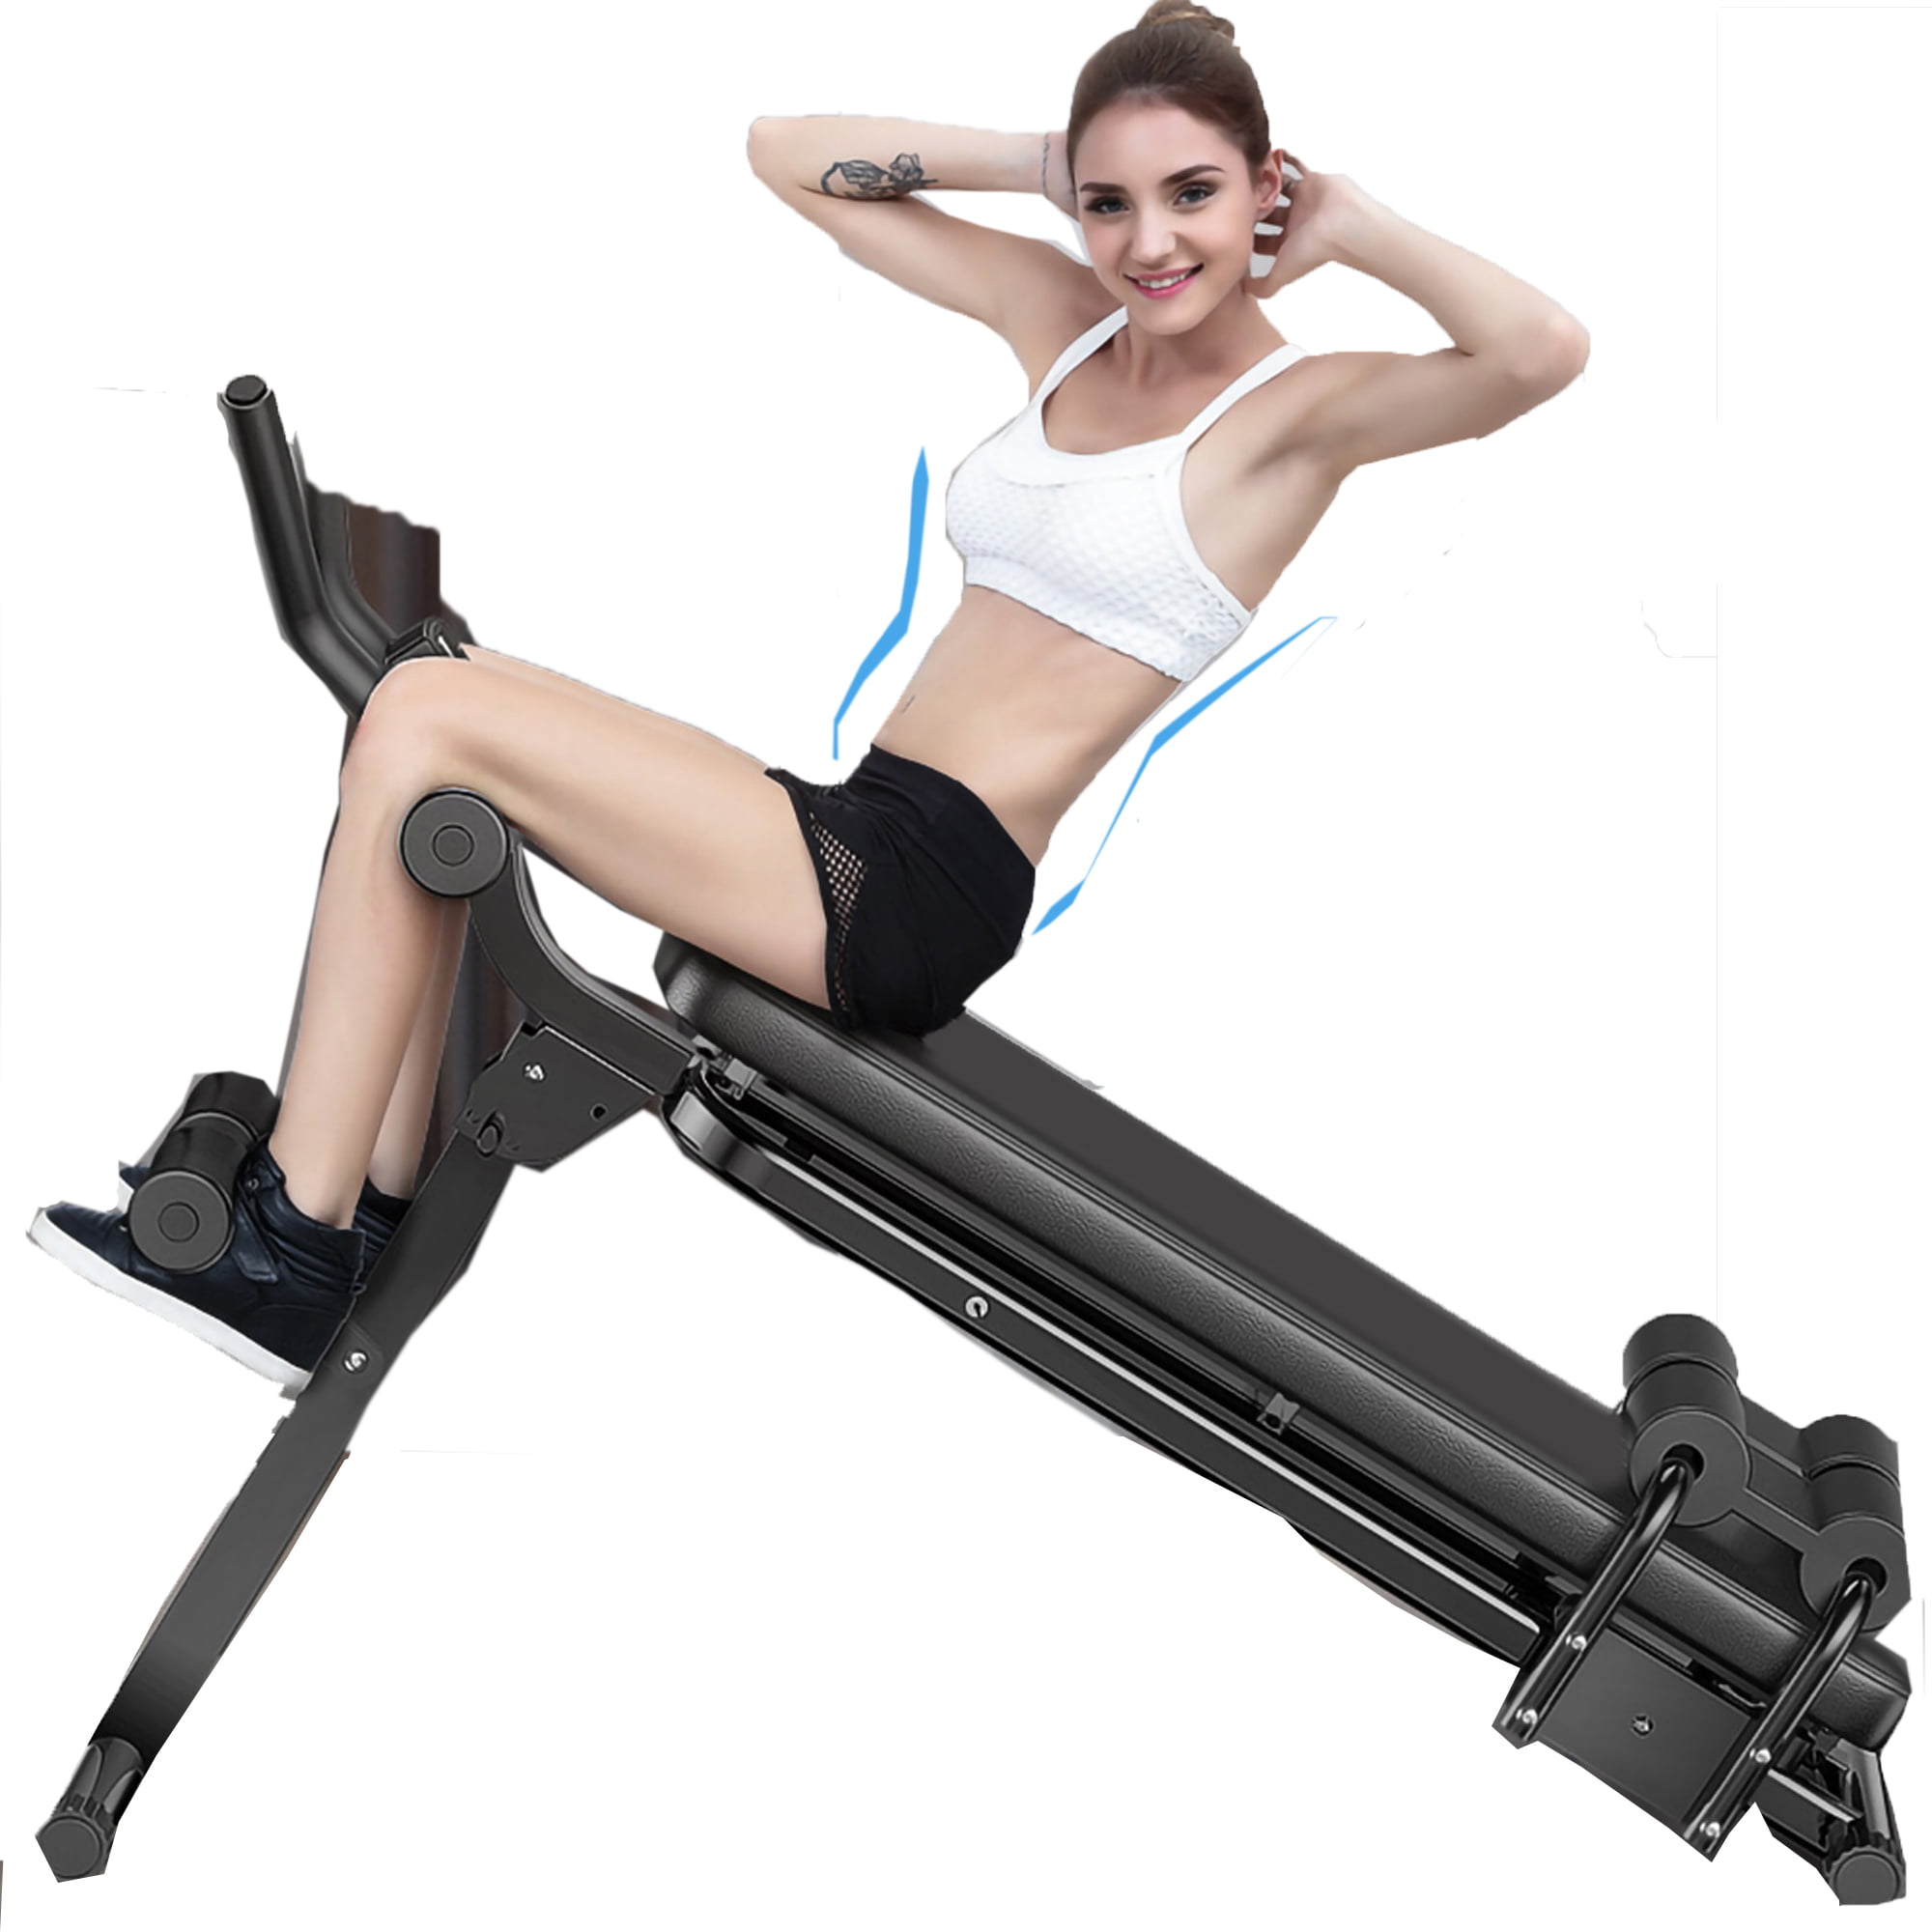 Weight Bench Home Gym Workout Equipment Flat Incline Sit Up Training Exercise 